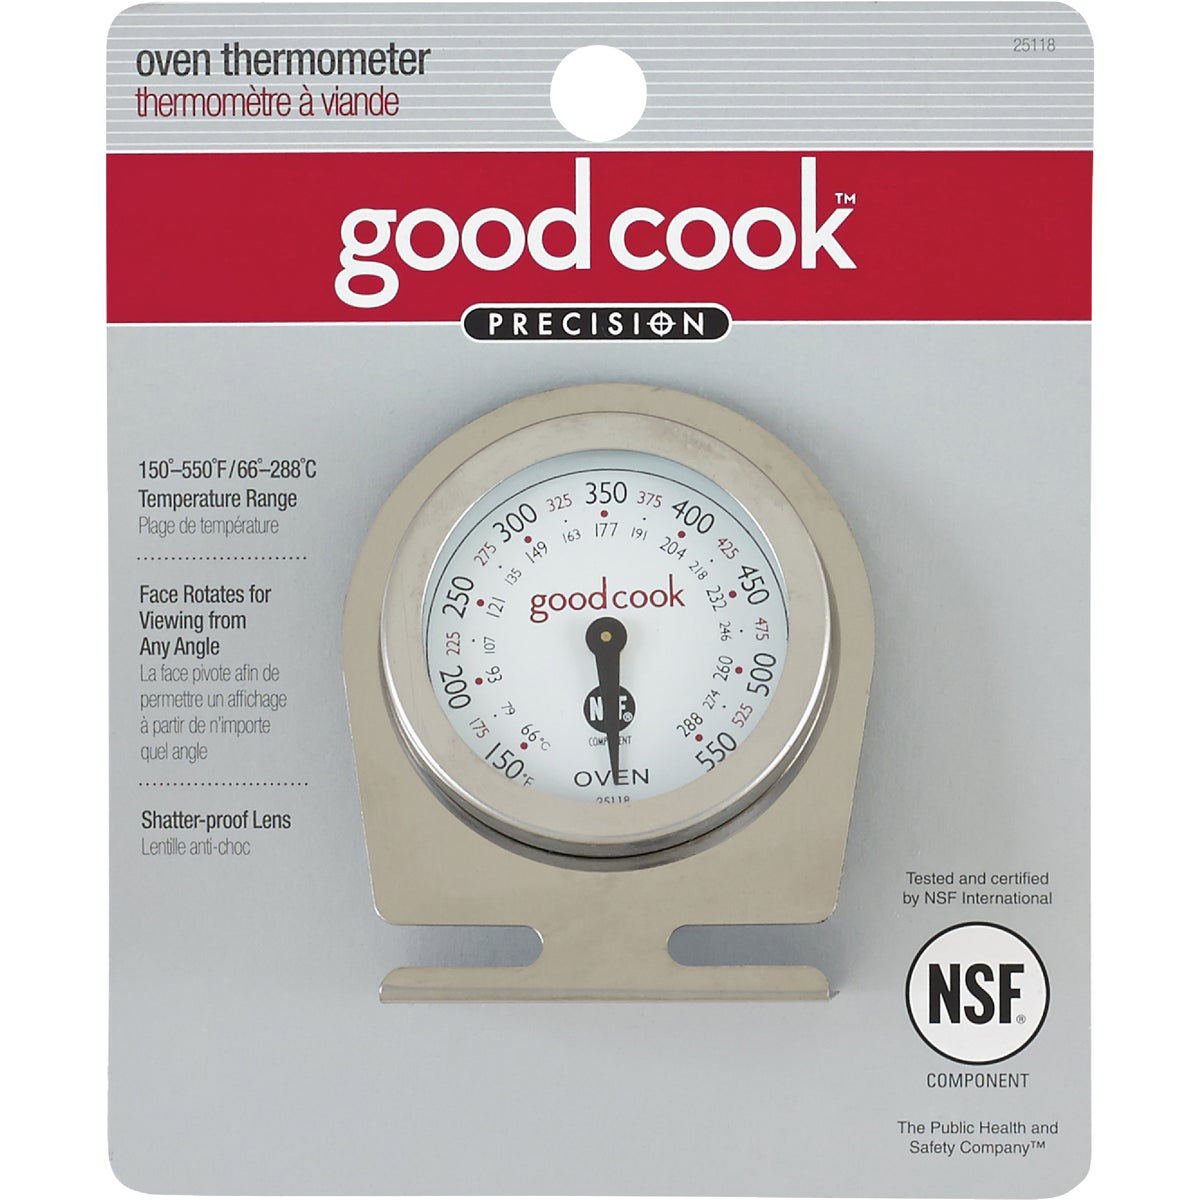 The Best Oven Thermometer (2023) Will De-Fraud Your Oven